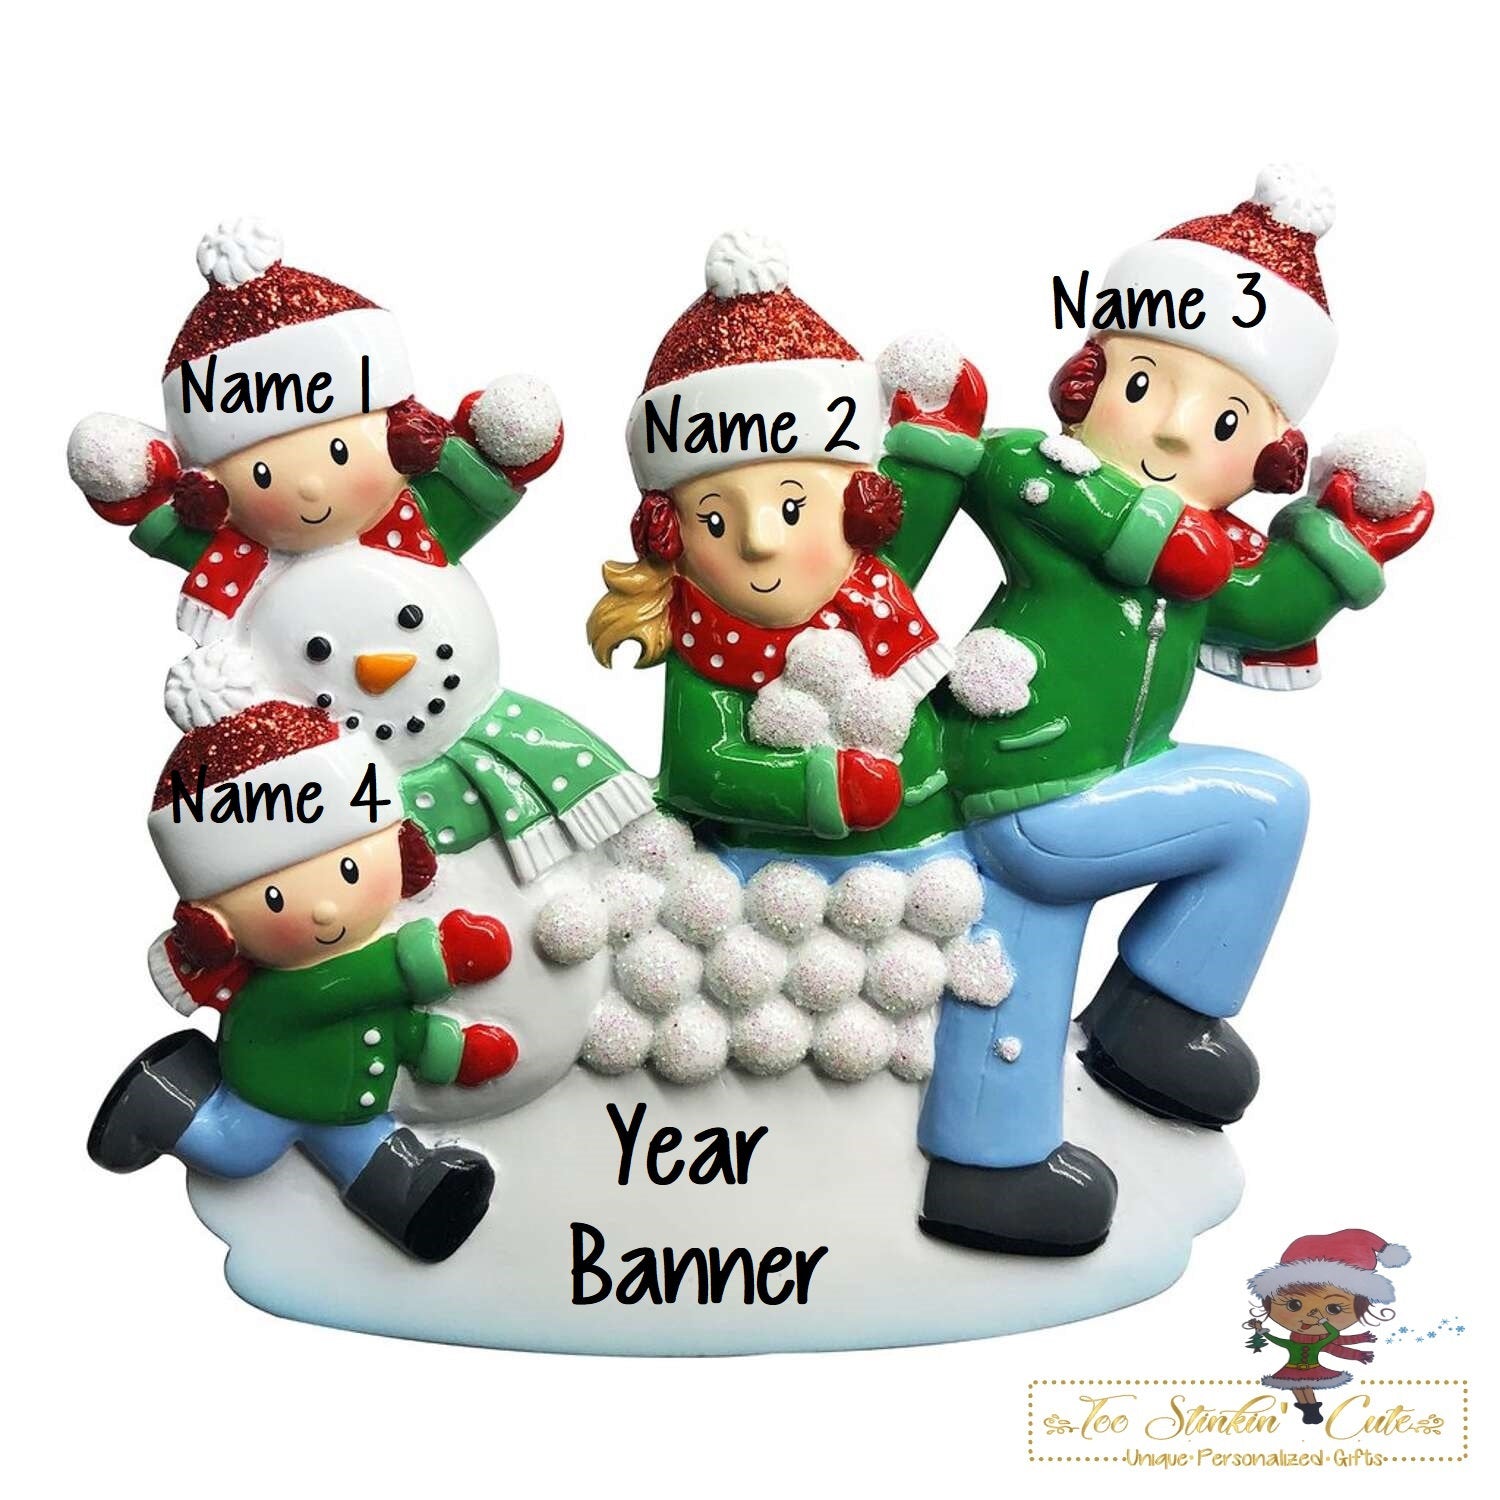 Christmas Ornament Snowball Fight Family of 4/ Friends Coworkers Employees - Personalized + Free Shipping!